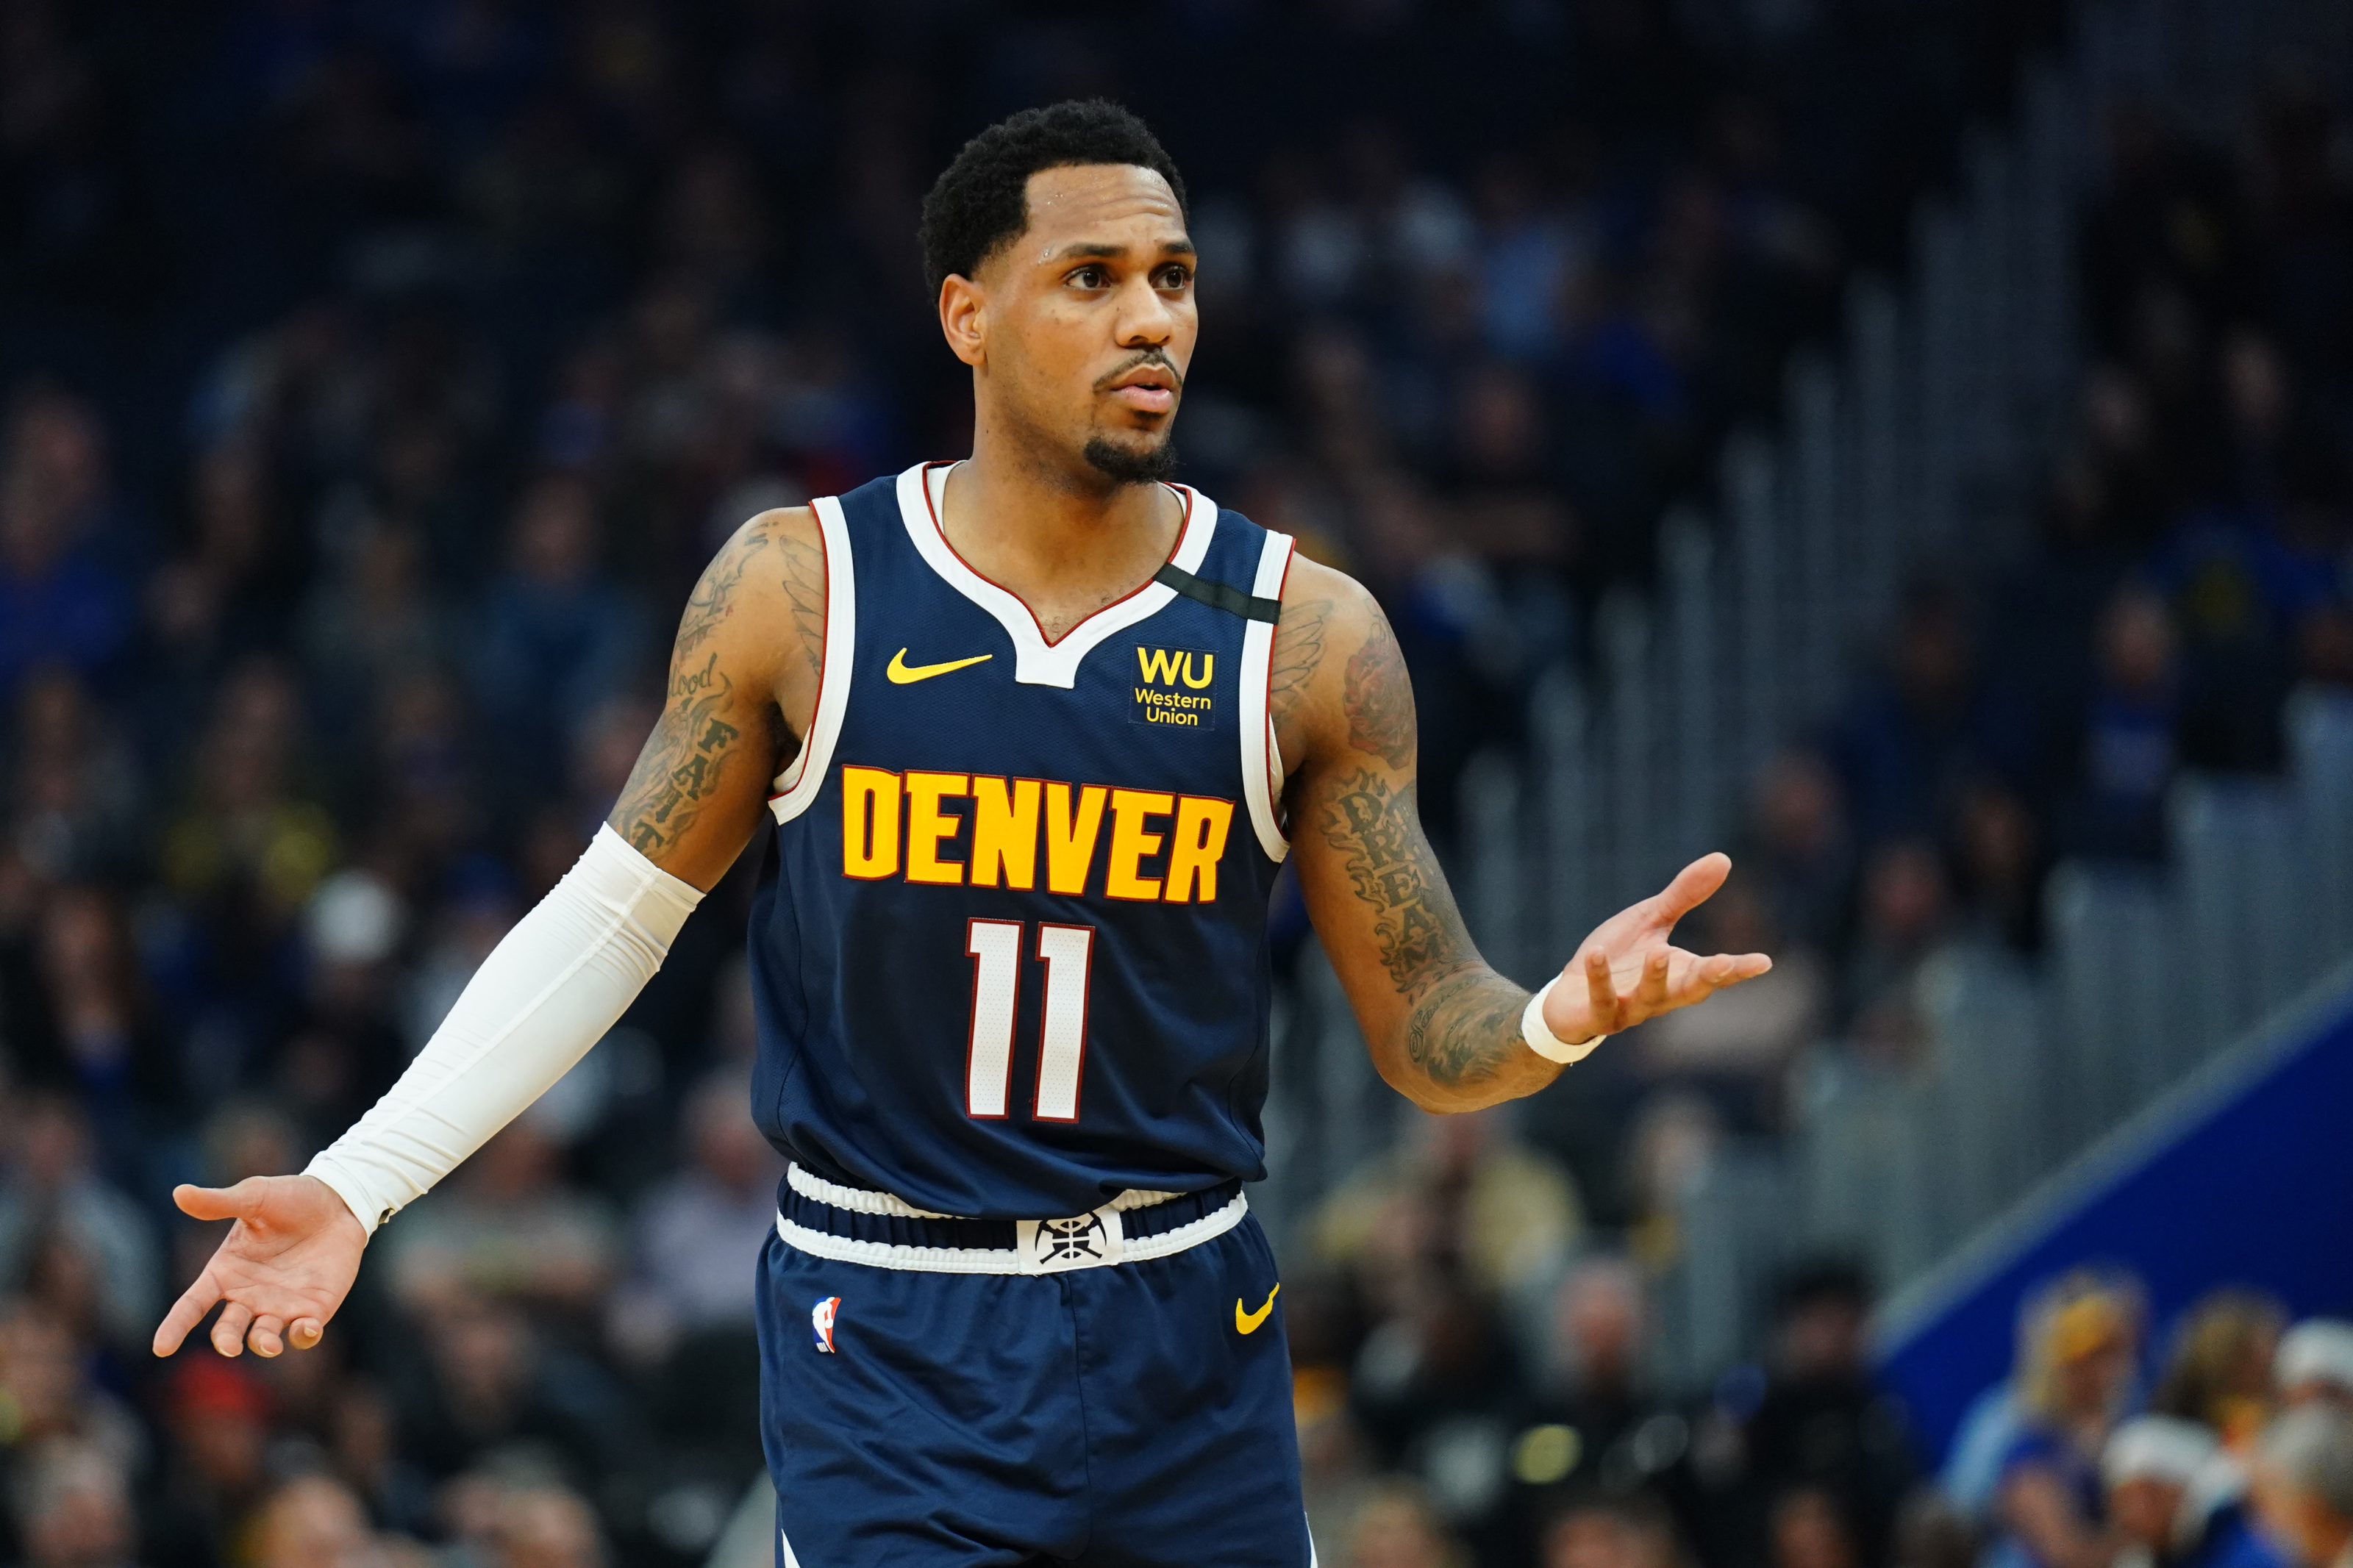 The Portland Trail Blazers select Monte Morris in the 2017 NBA Redraft